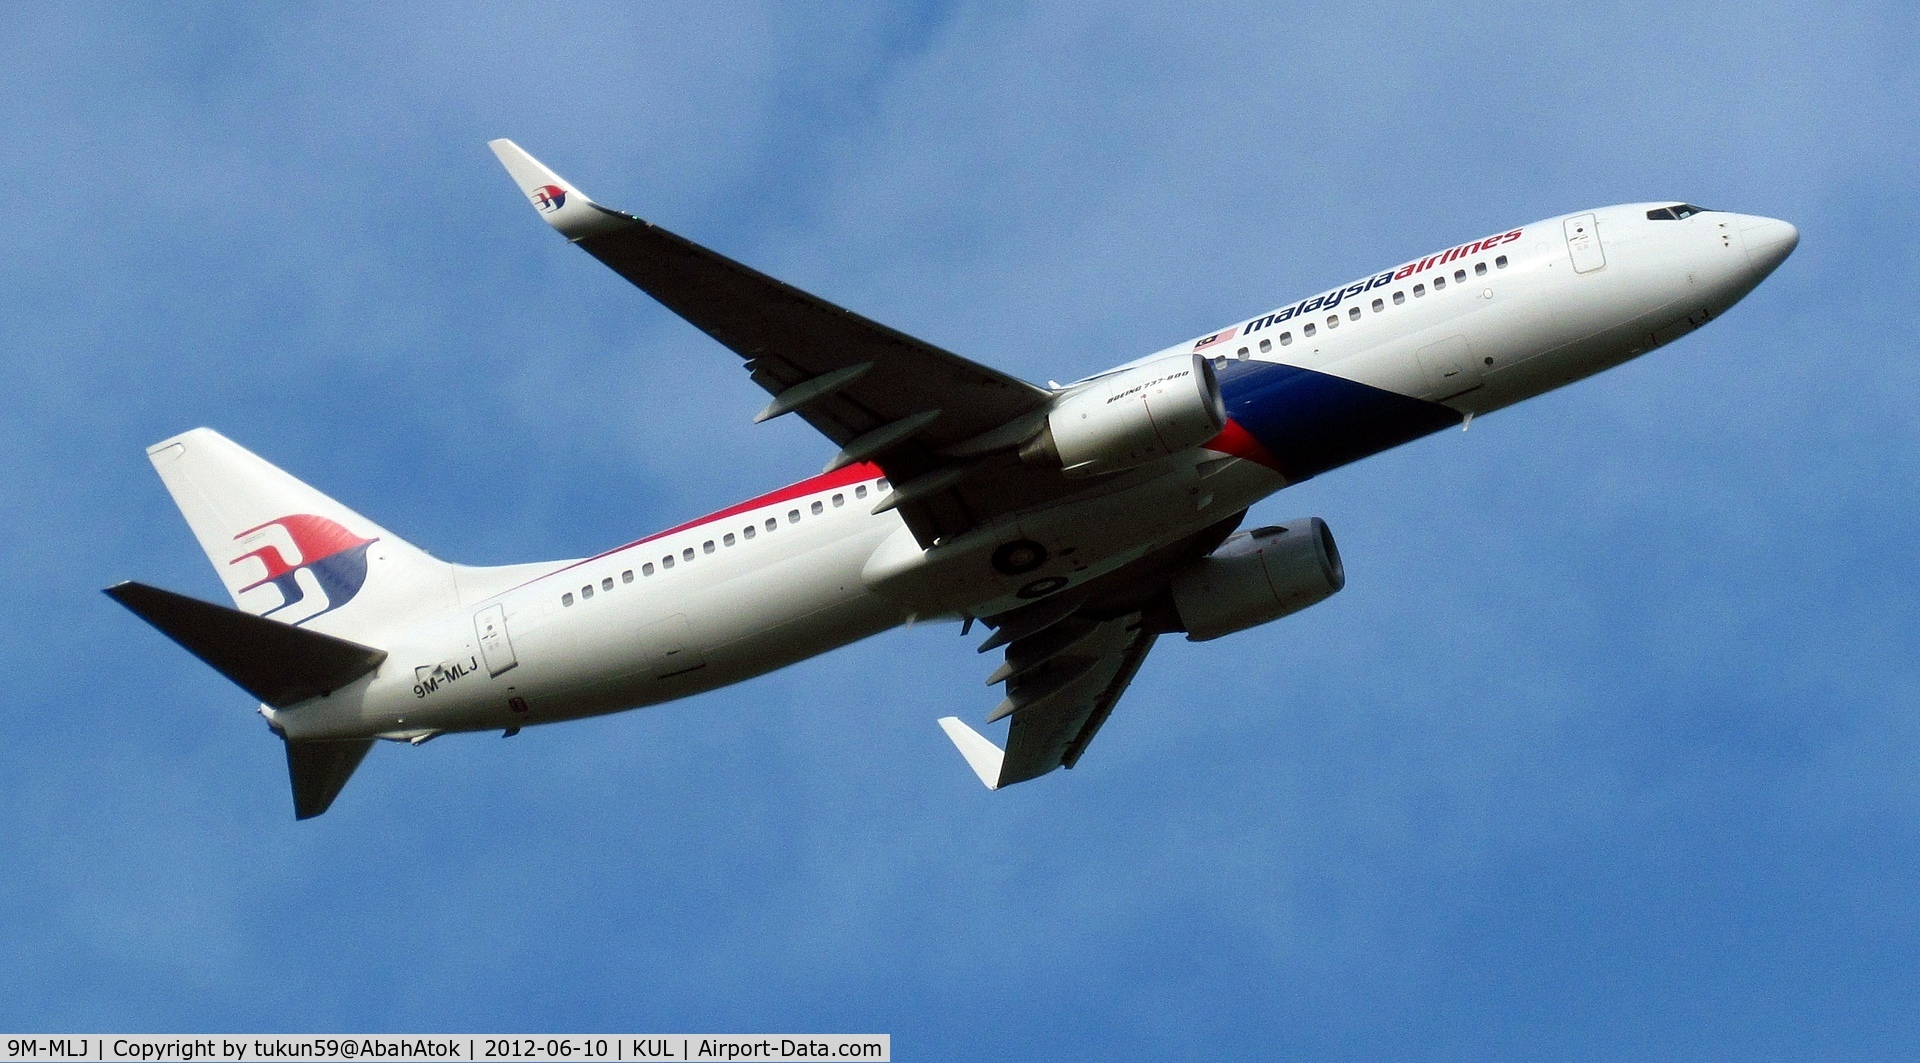 9M-MLJ, 2011 Boeing 737-8 C/N 39319, Malaysia Airlines